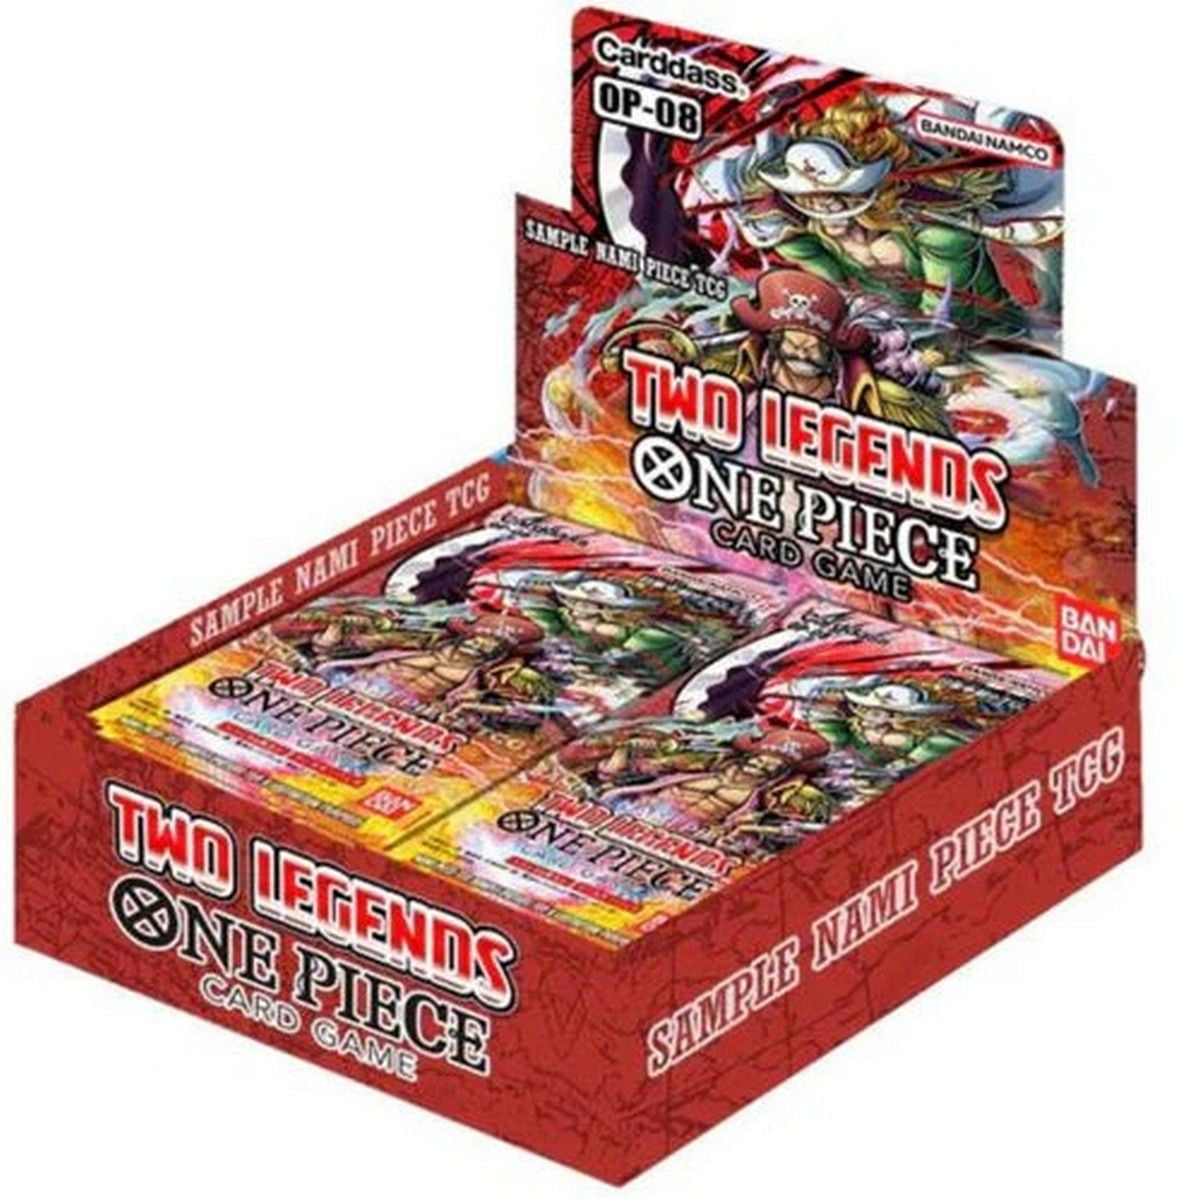 One Piece Card Game: Booster Box - Two Legends (OP-08)